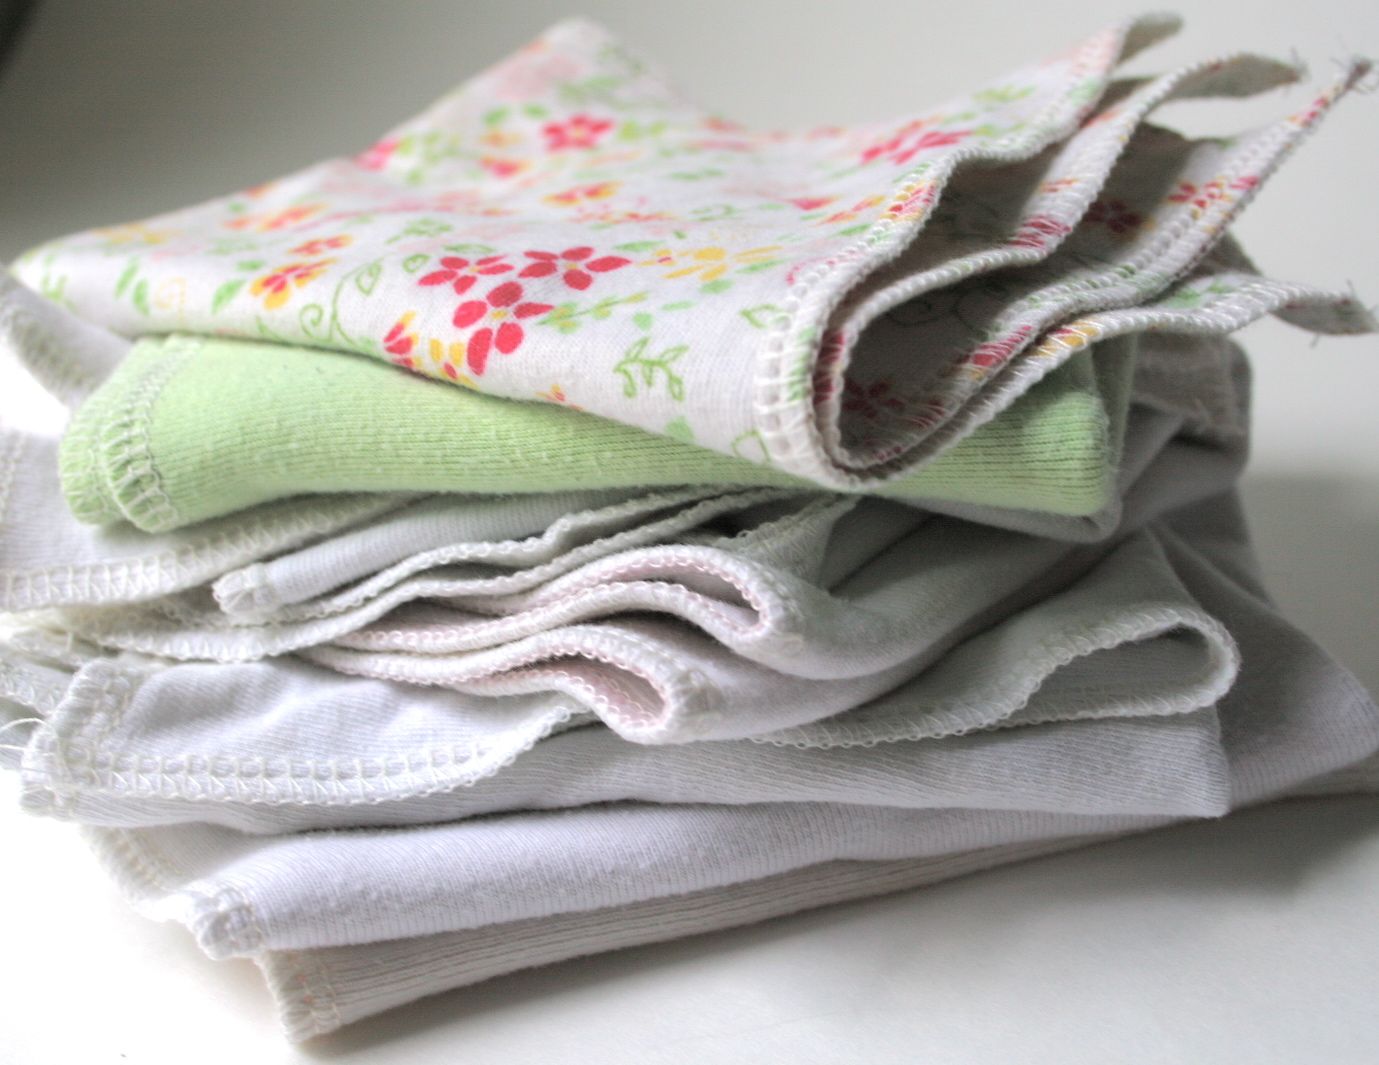 Make baby washcloths out of old t-shirts.